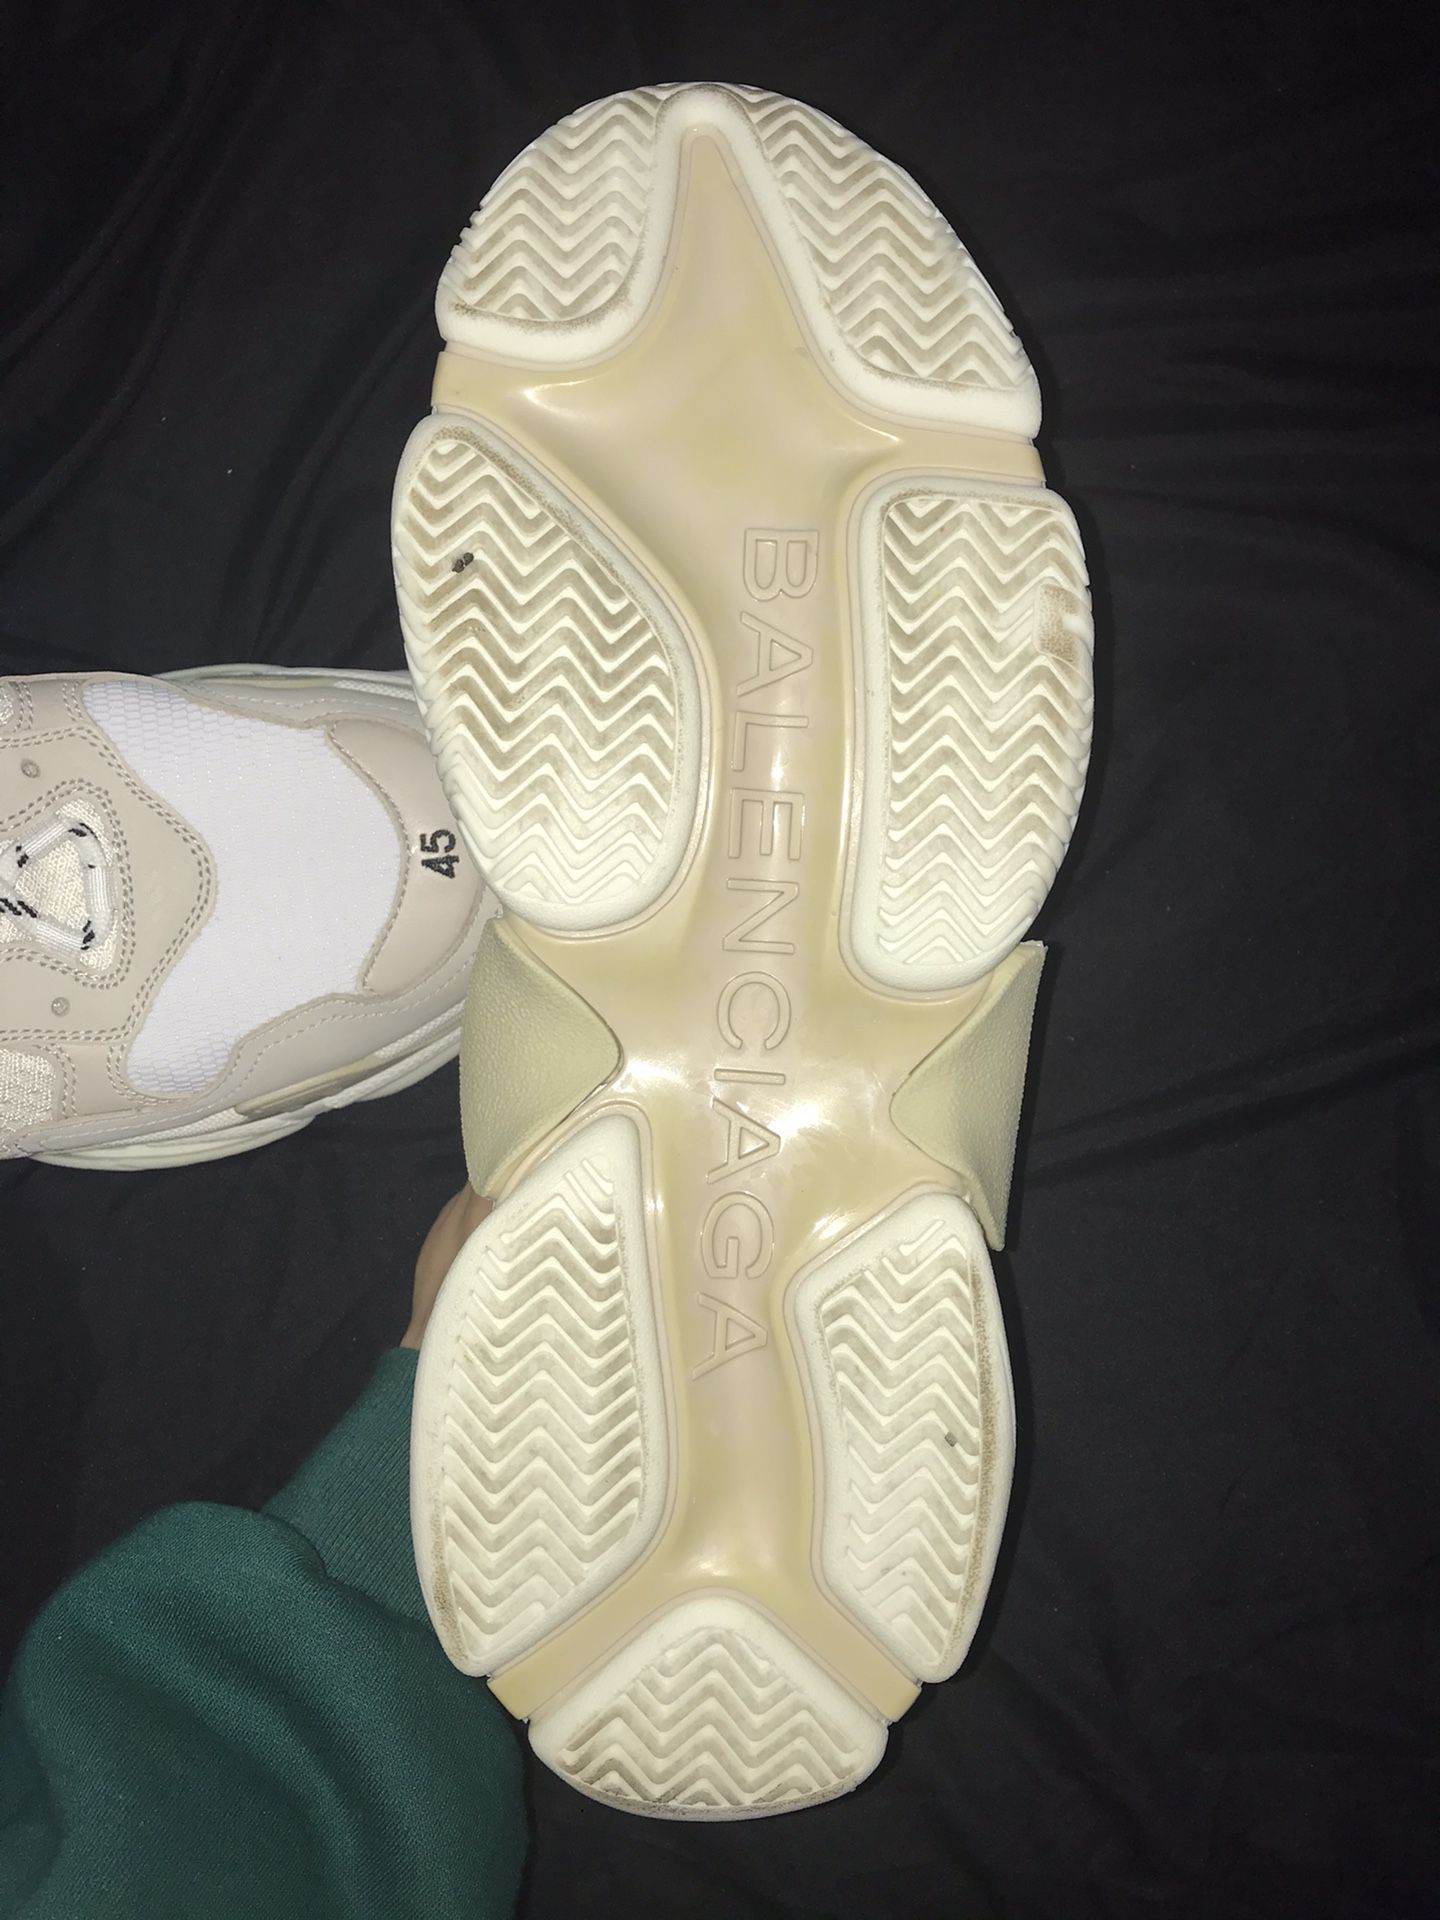 Balenciaga Triple S Cream/White for Sale in Findlay, OH - OfferUp